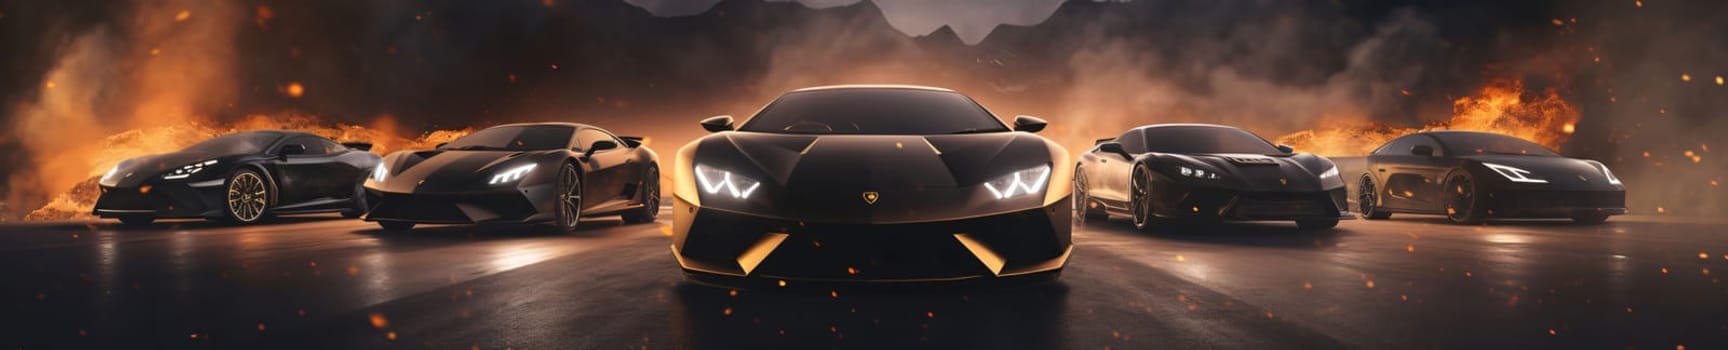 Banner: 3D render of a sports car on a dark background with fire